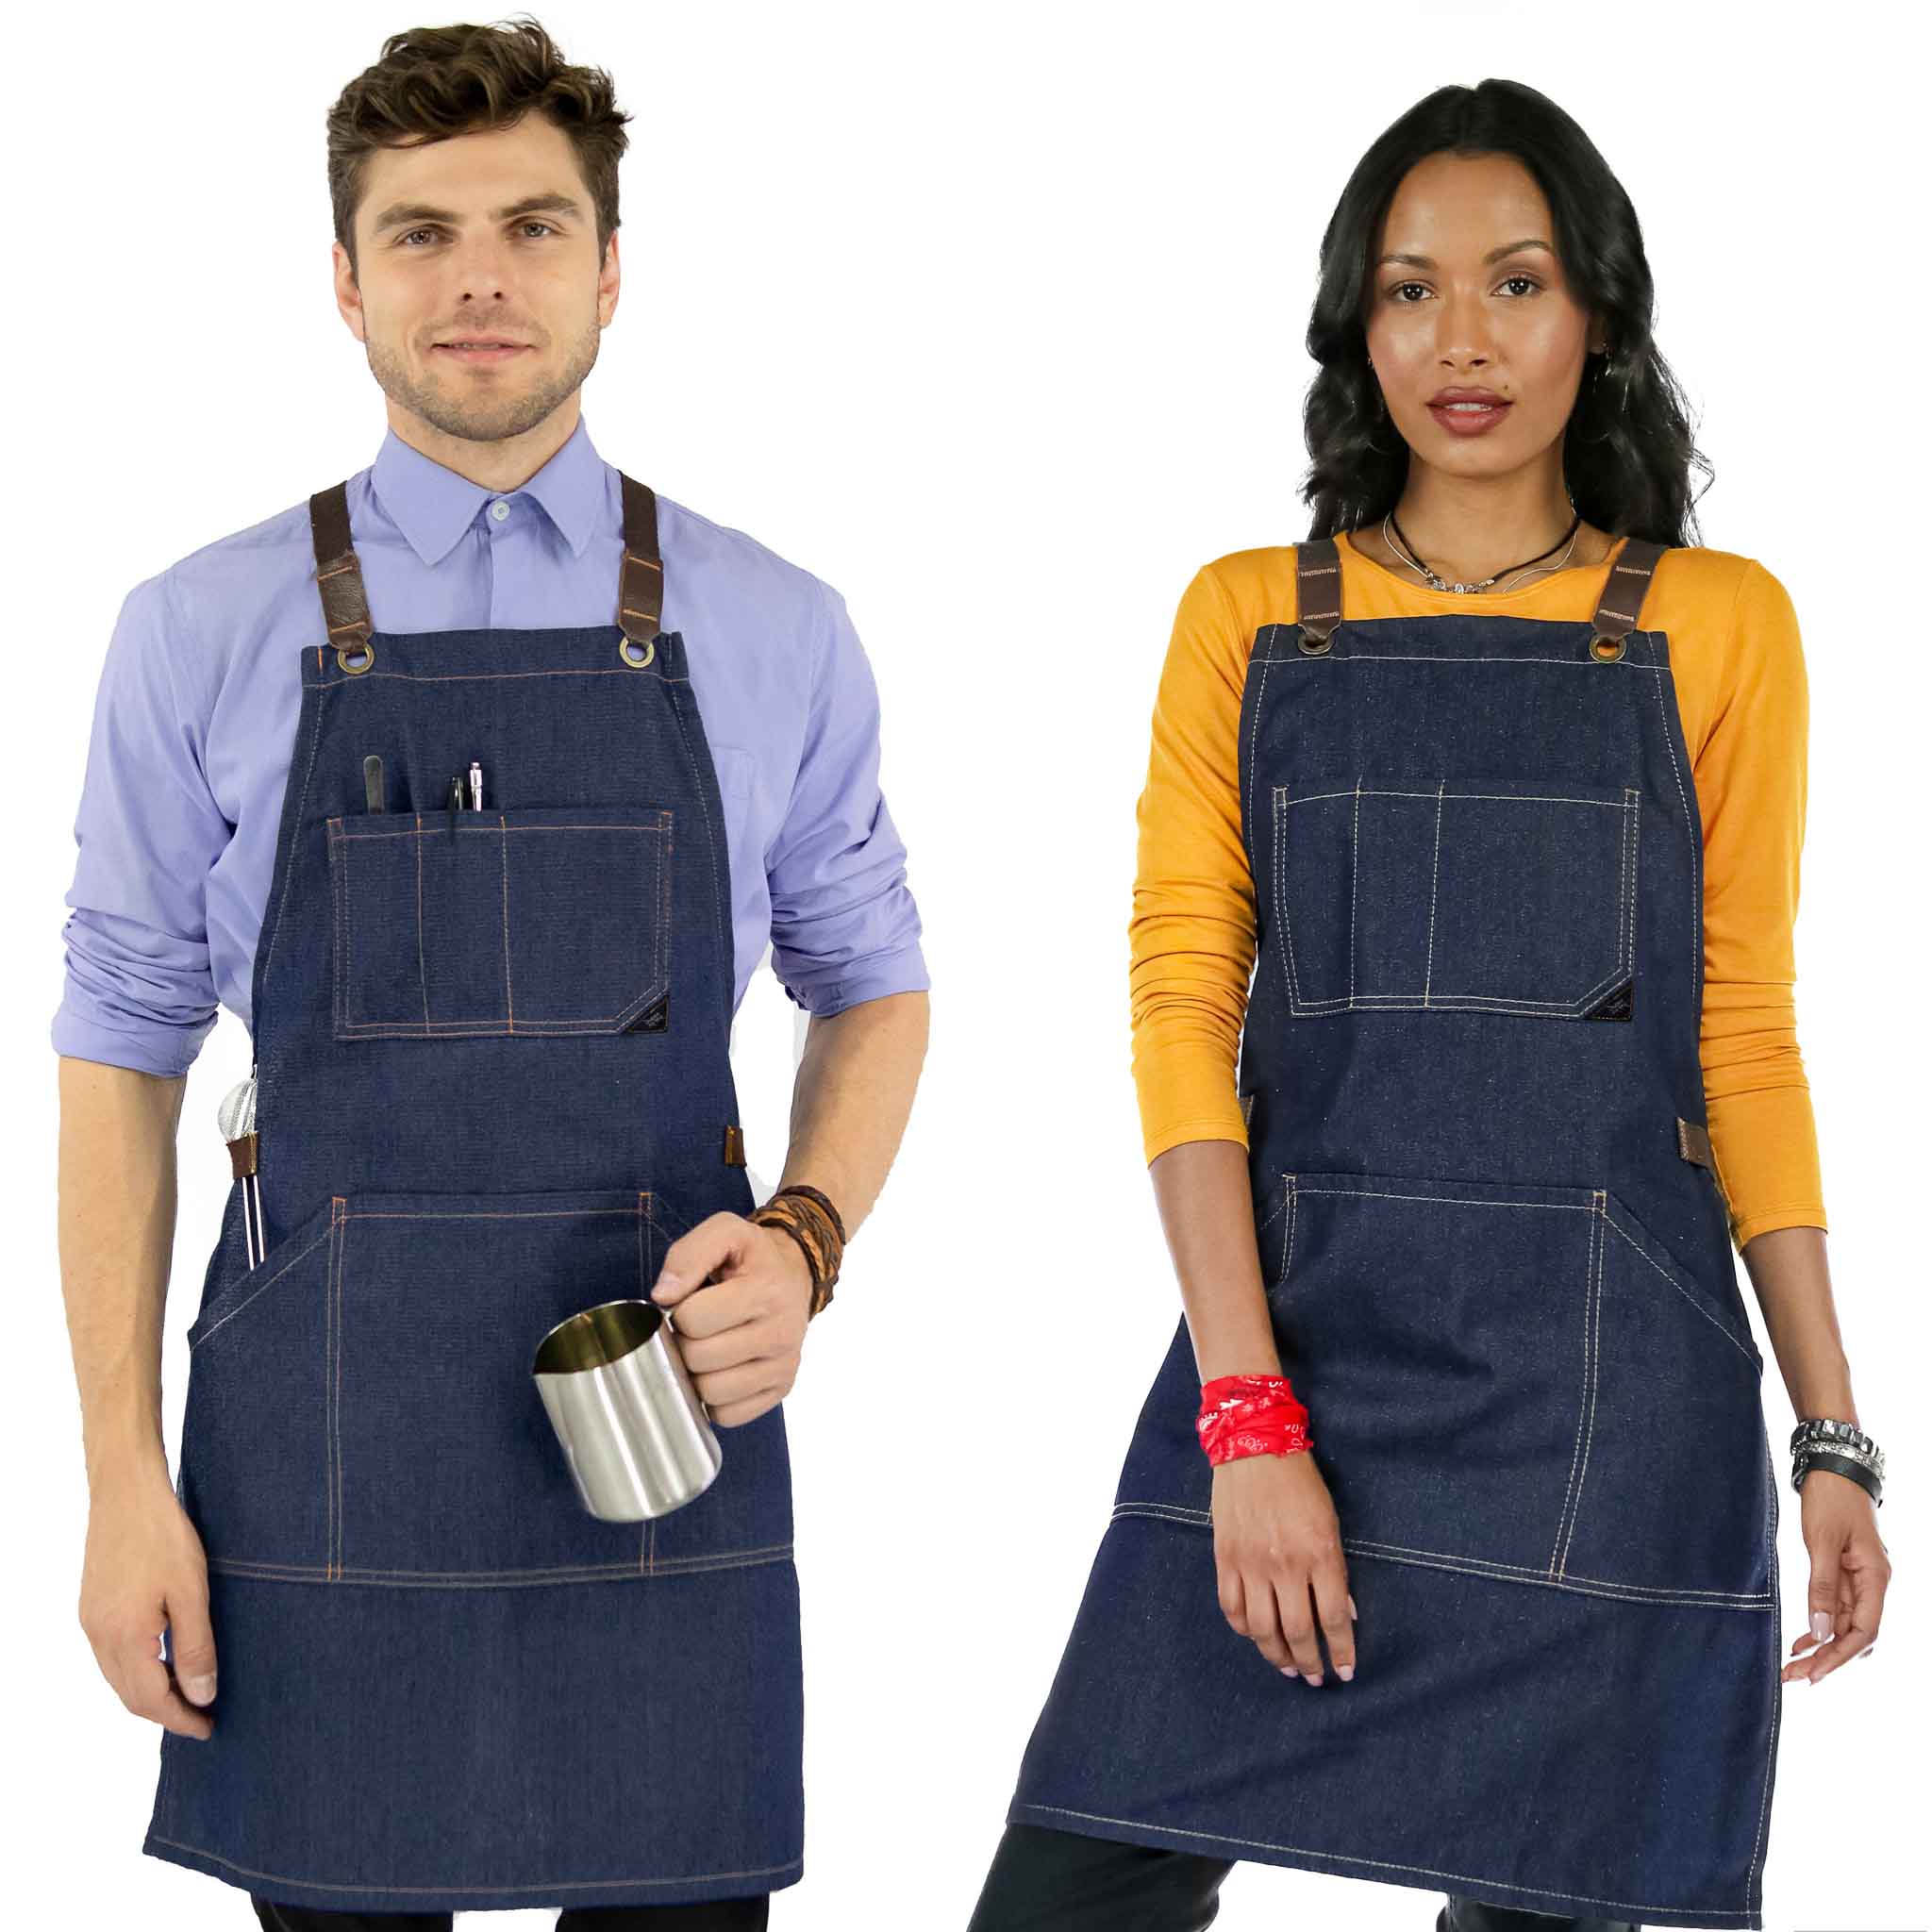 Try this: handmade leather and denim apron - The Crafty Gentleman